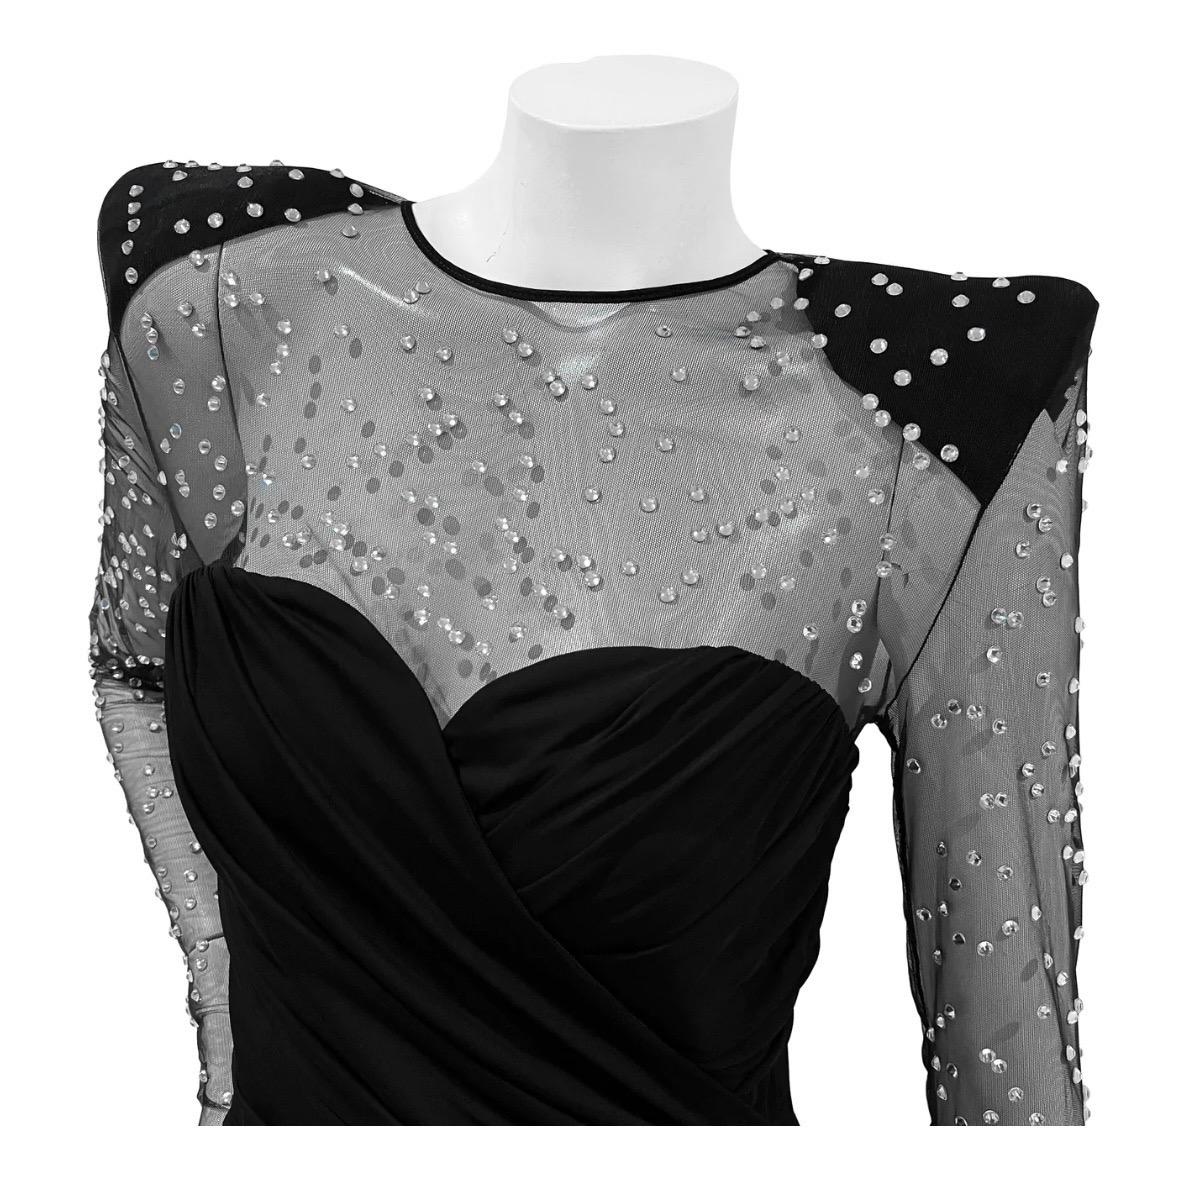 Long Sleeve Crystal Mesh Gown by Balmain
Made in France
Black
Mesh sleeves and top with decorative crystal embellishment
Black shoulder pad detail
Heart style neckline
Ruched and dual layer detail and on gown
Large bottom cut out detail
Back